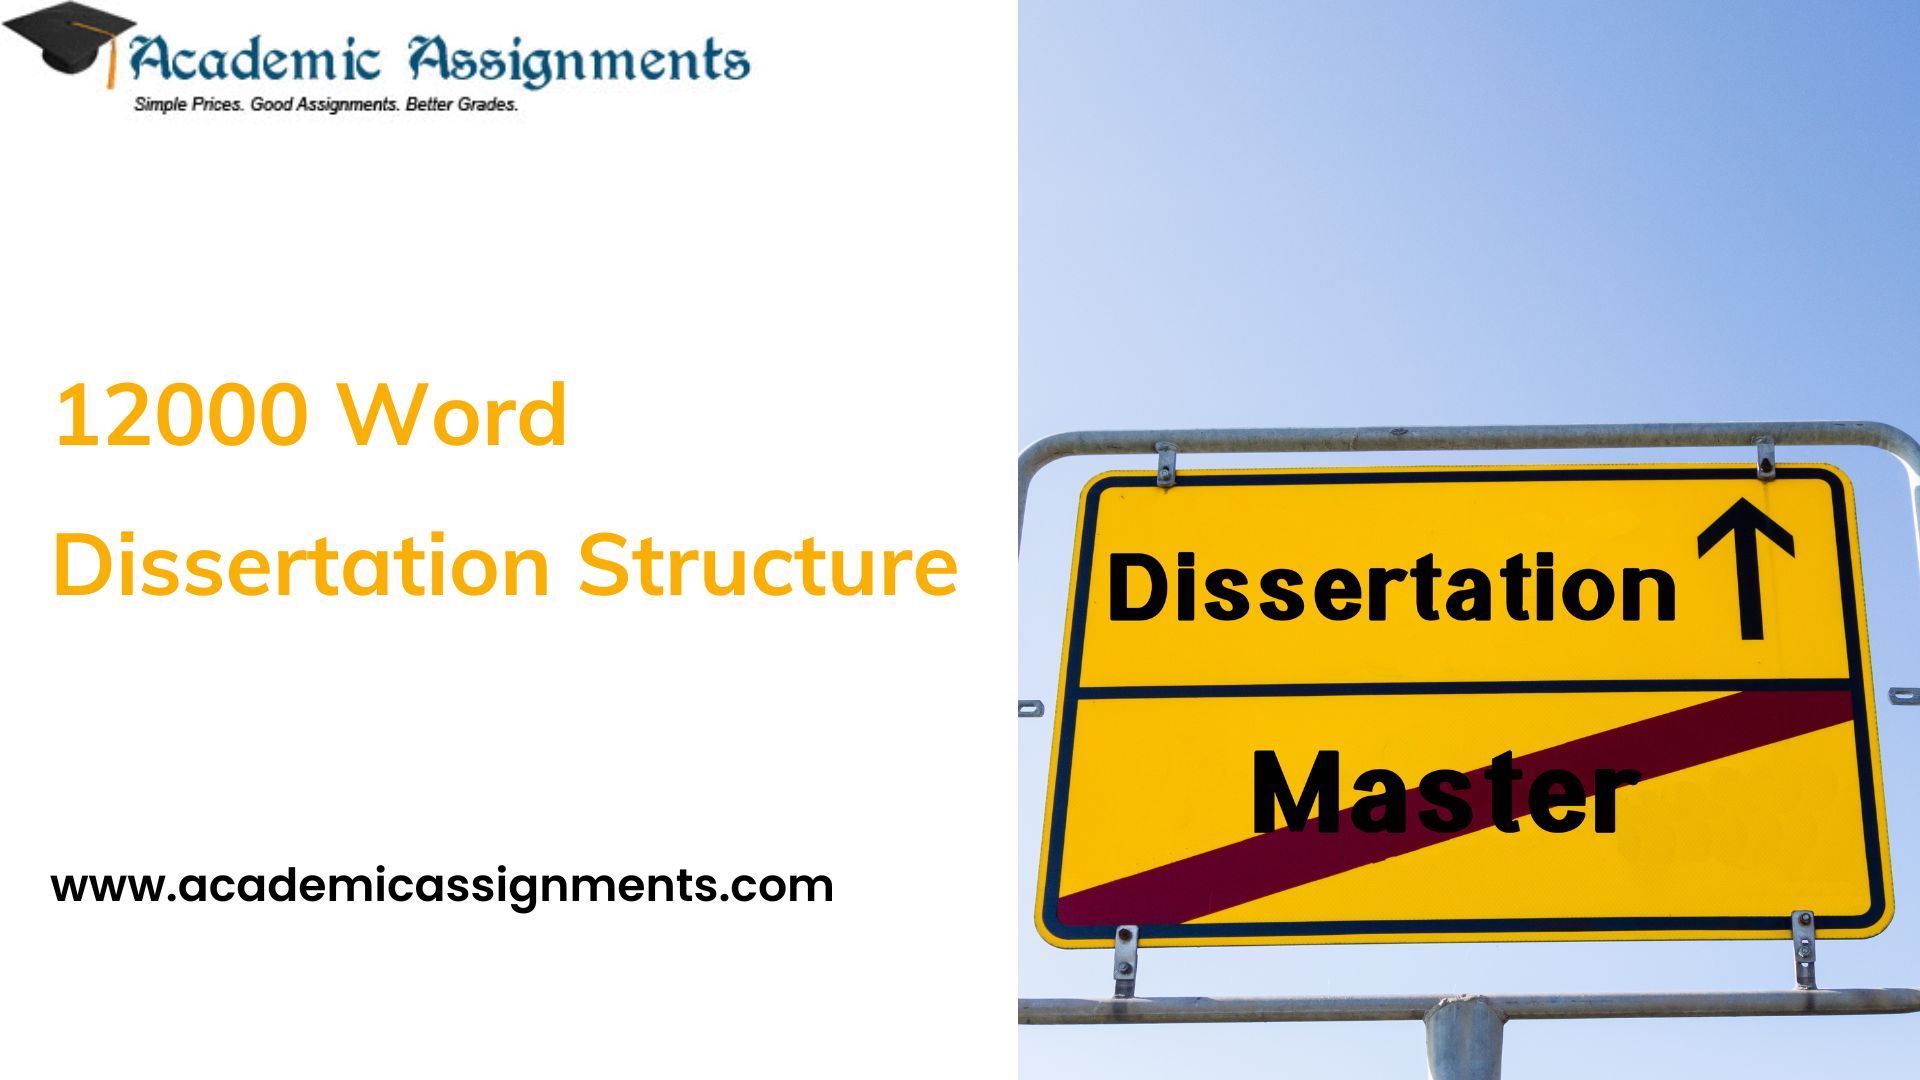 what is meant by the word dissertation